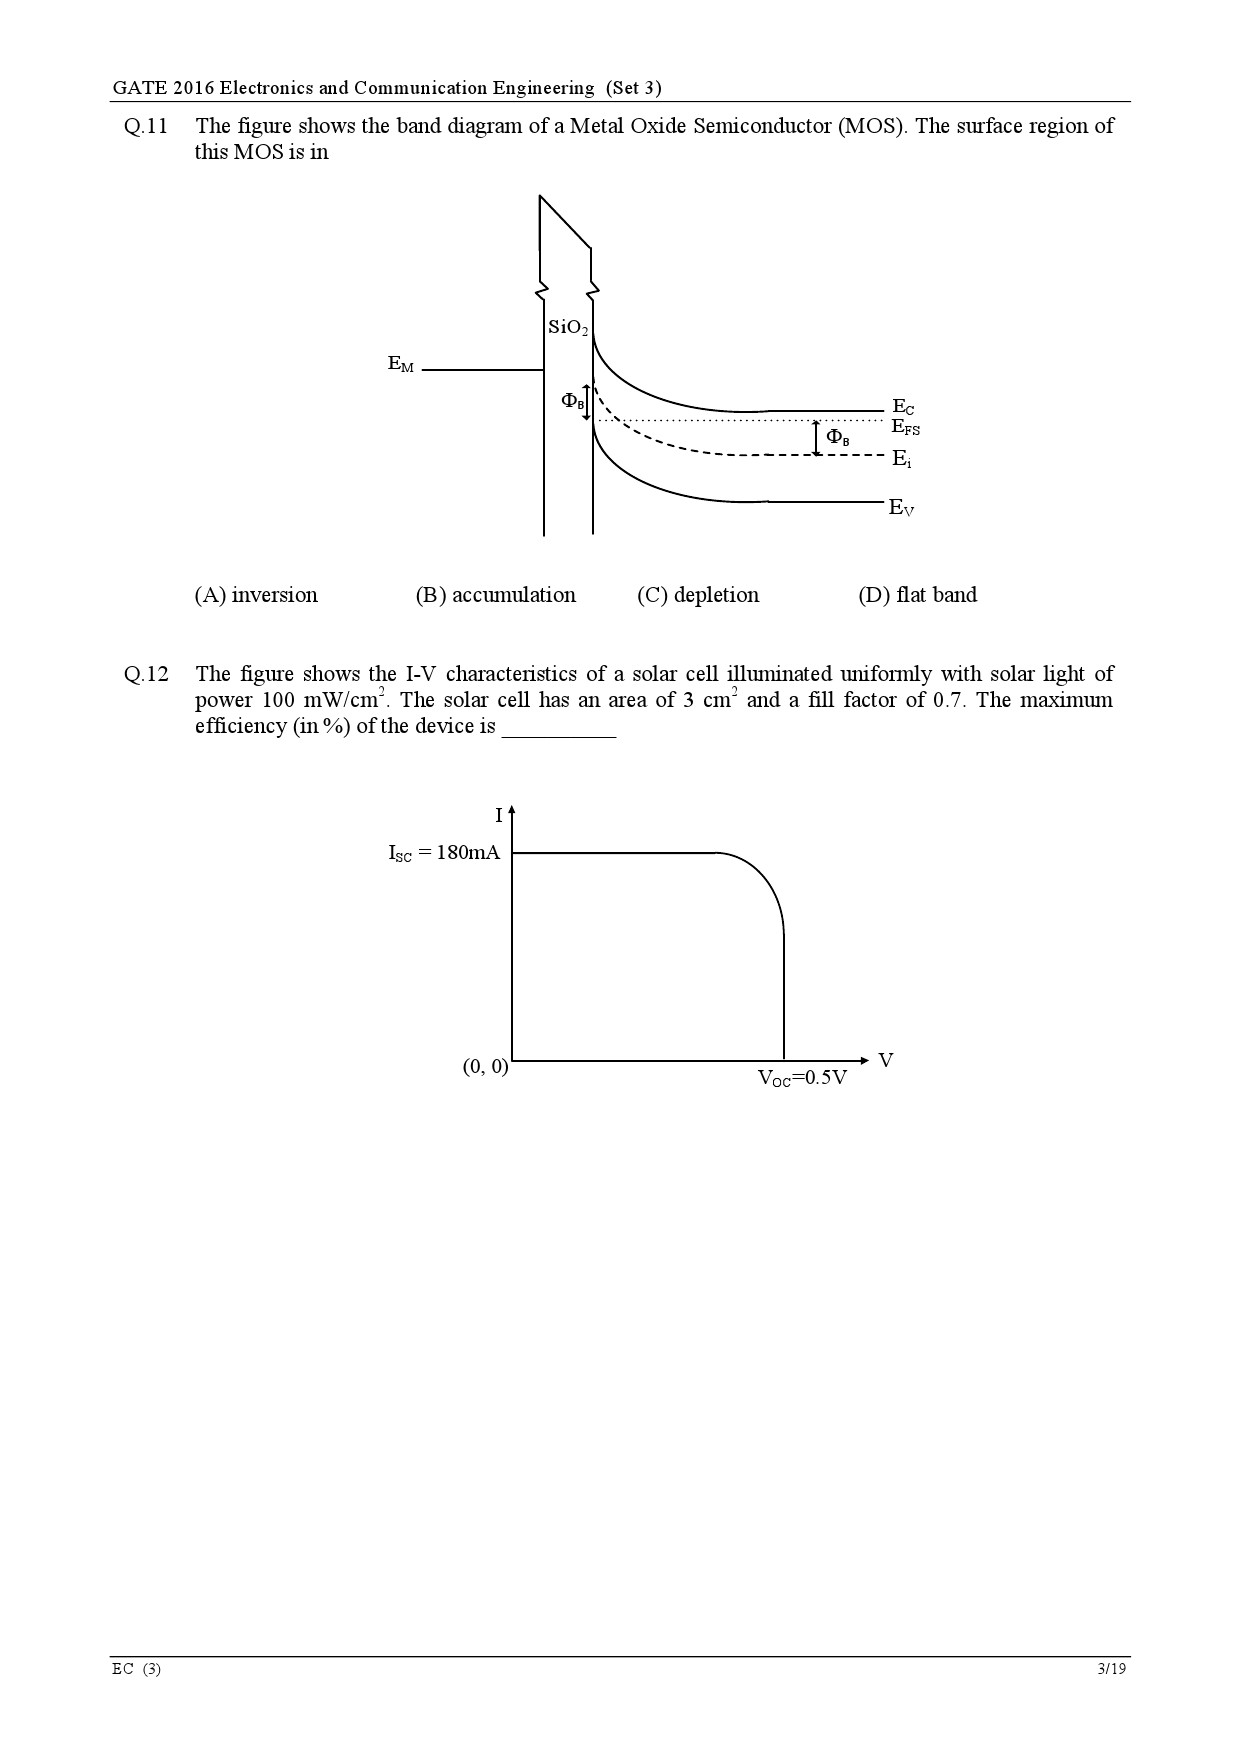 GATE Exam Question Paper 2016 Electronics and Communication Engineering Set 3 6